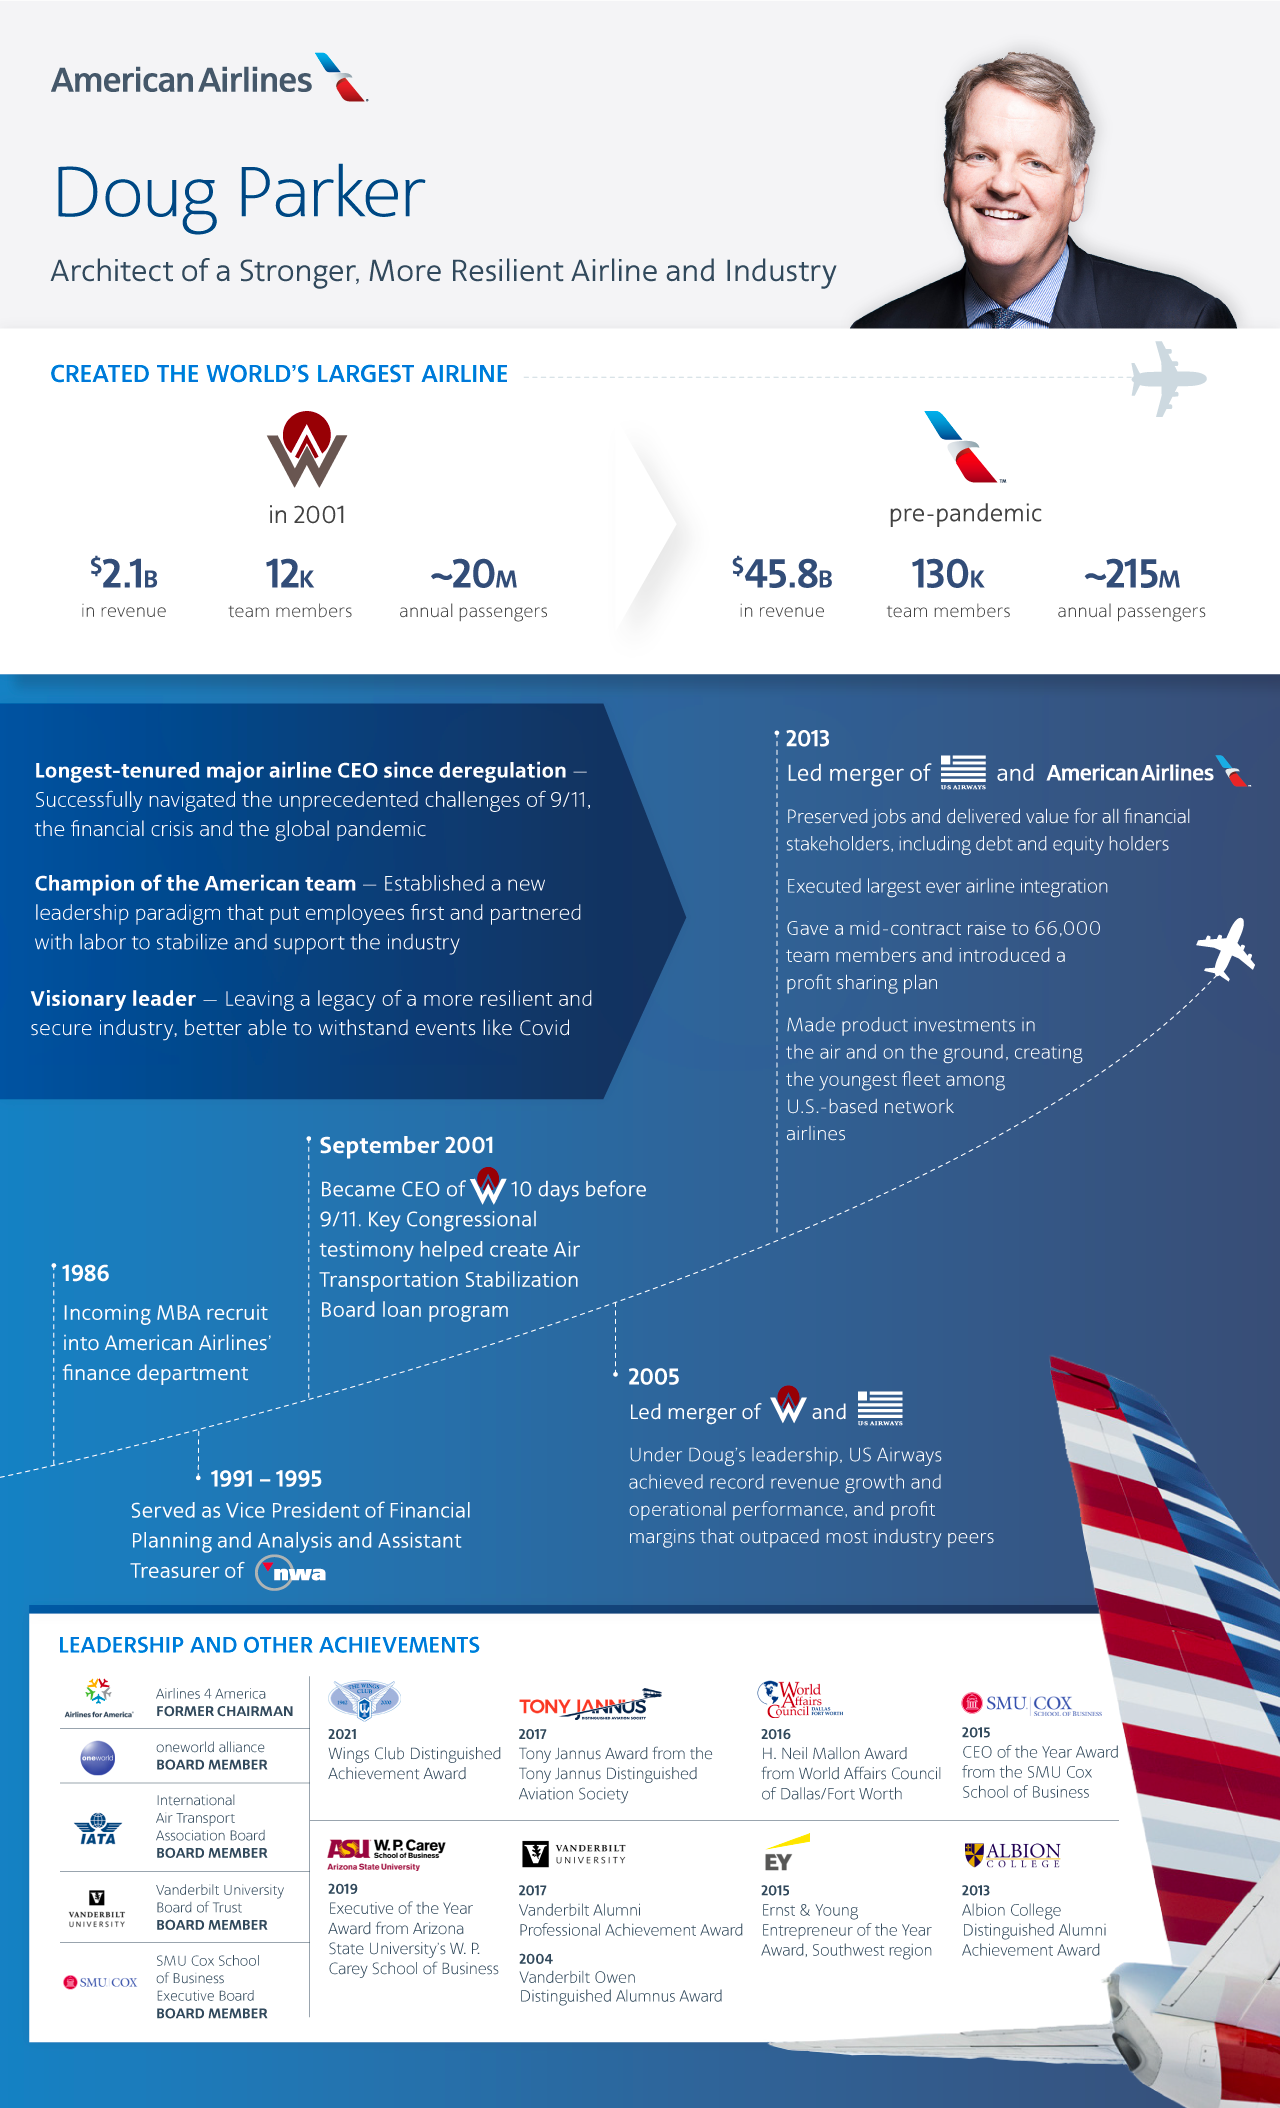 Supplier diversity - About us - American Airlines